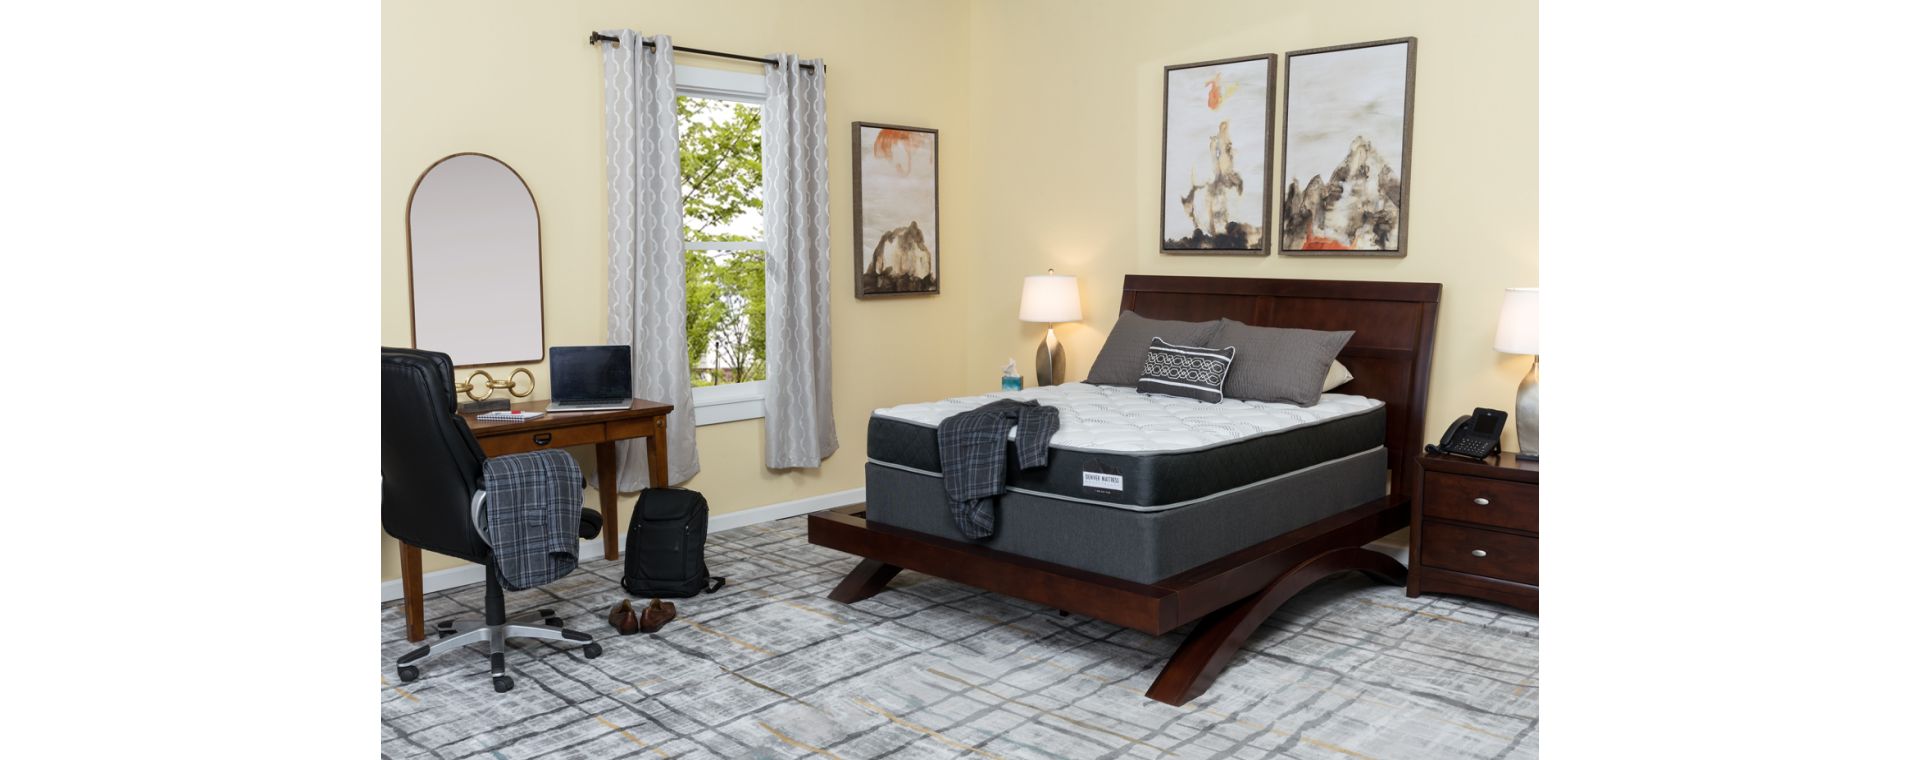 Augusta Supreme mattress from our Value Line pictured in a budget hotel room